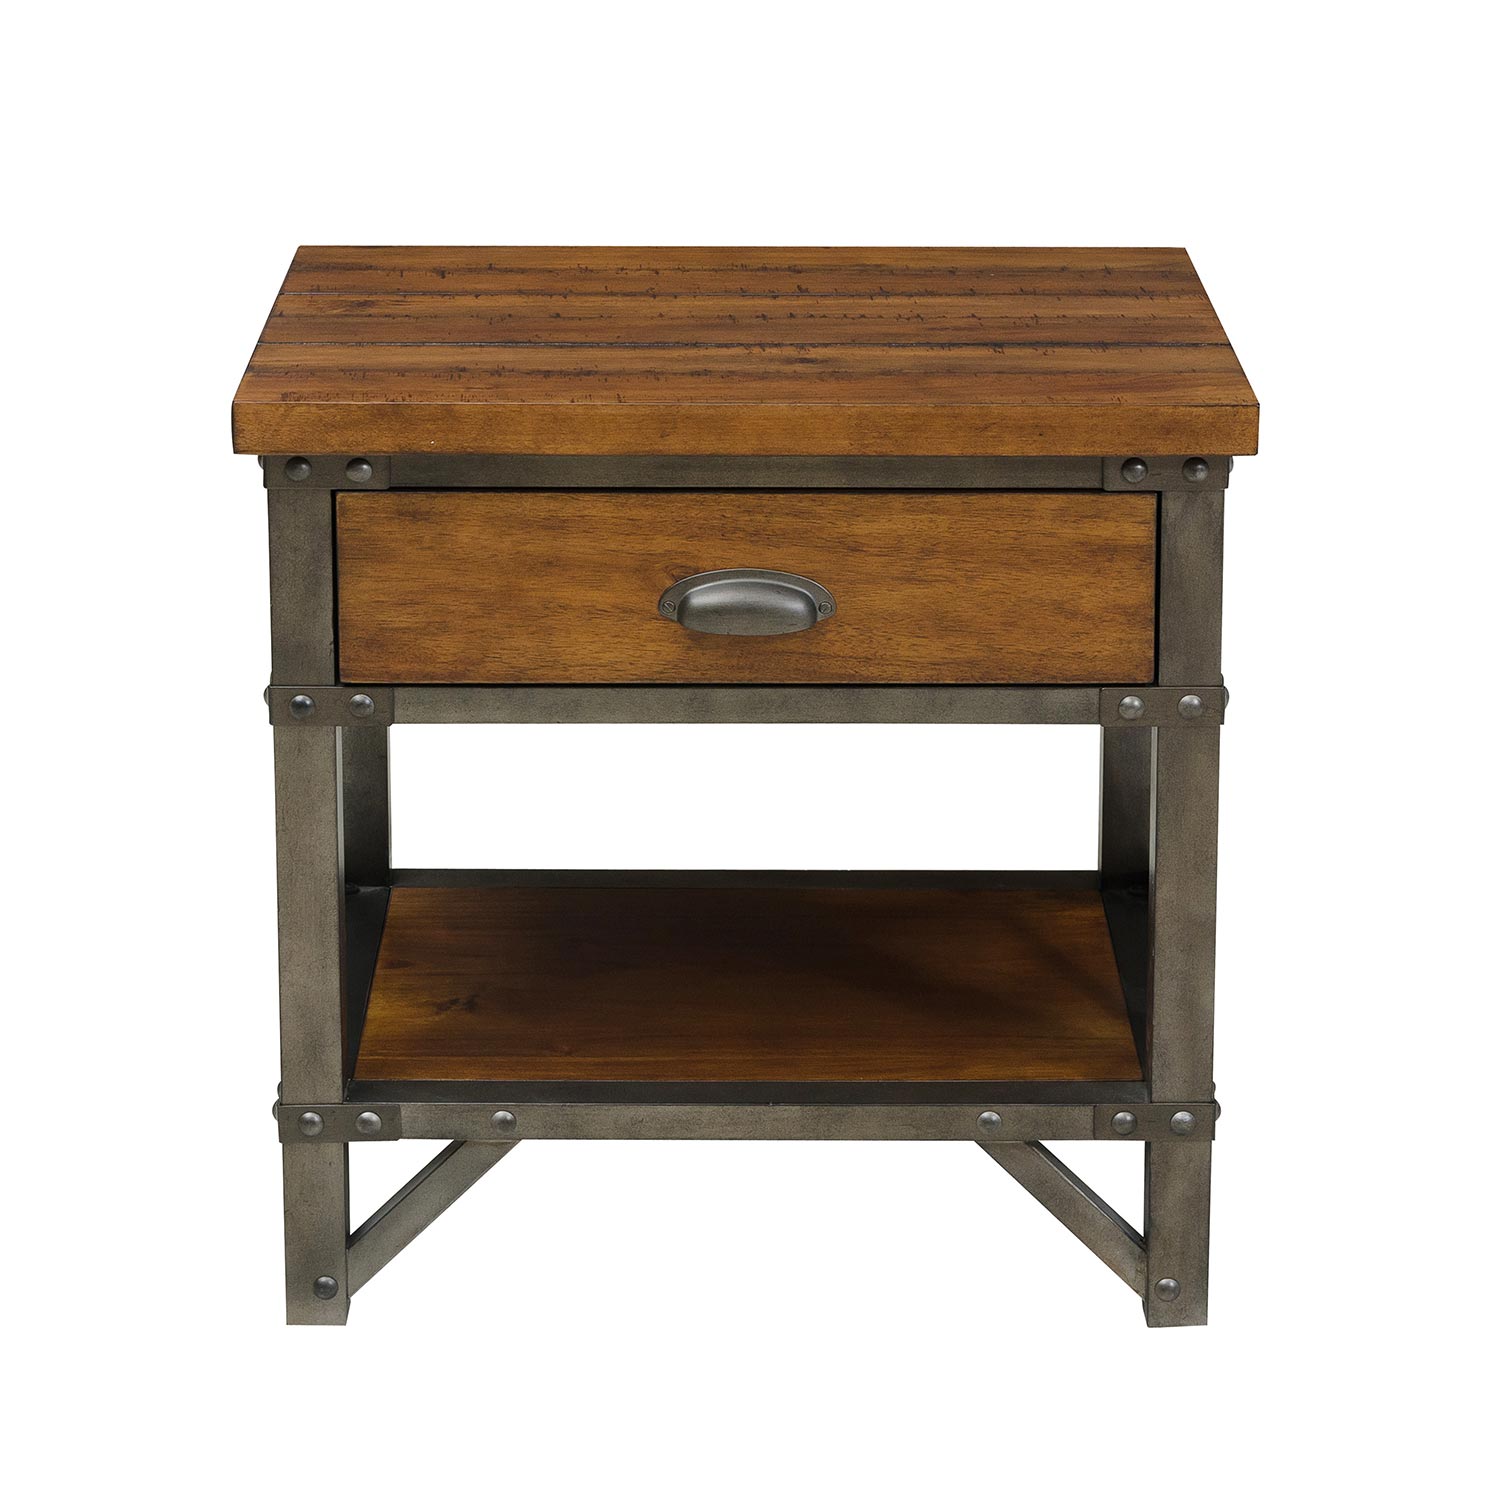 Homelegance Holverson Night Stand - Rustic Brown Milk Crate Finish